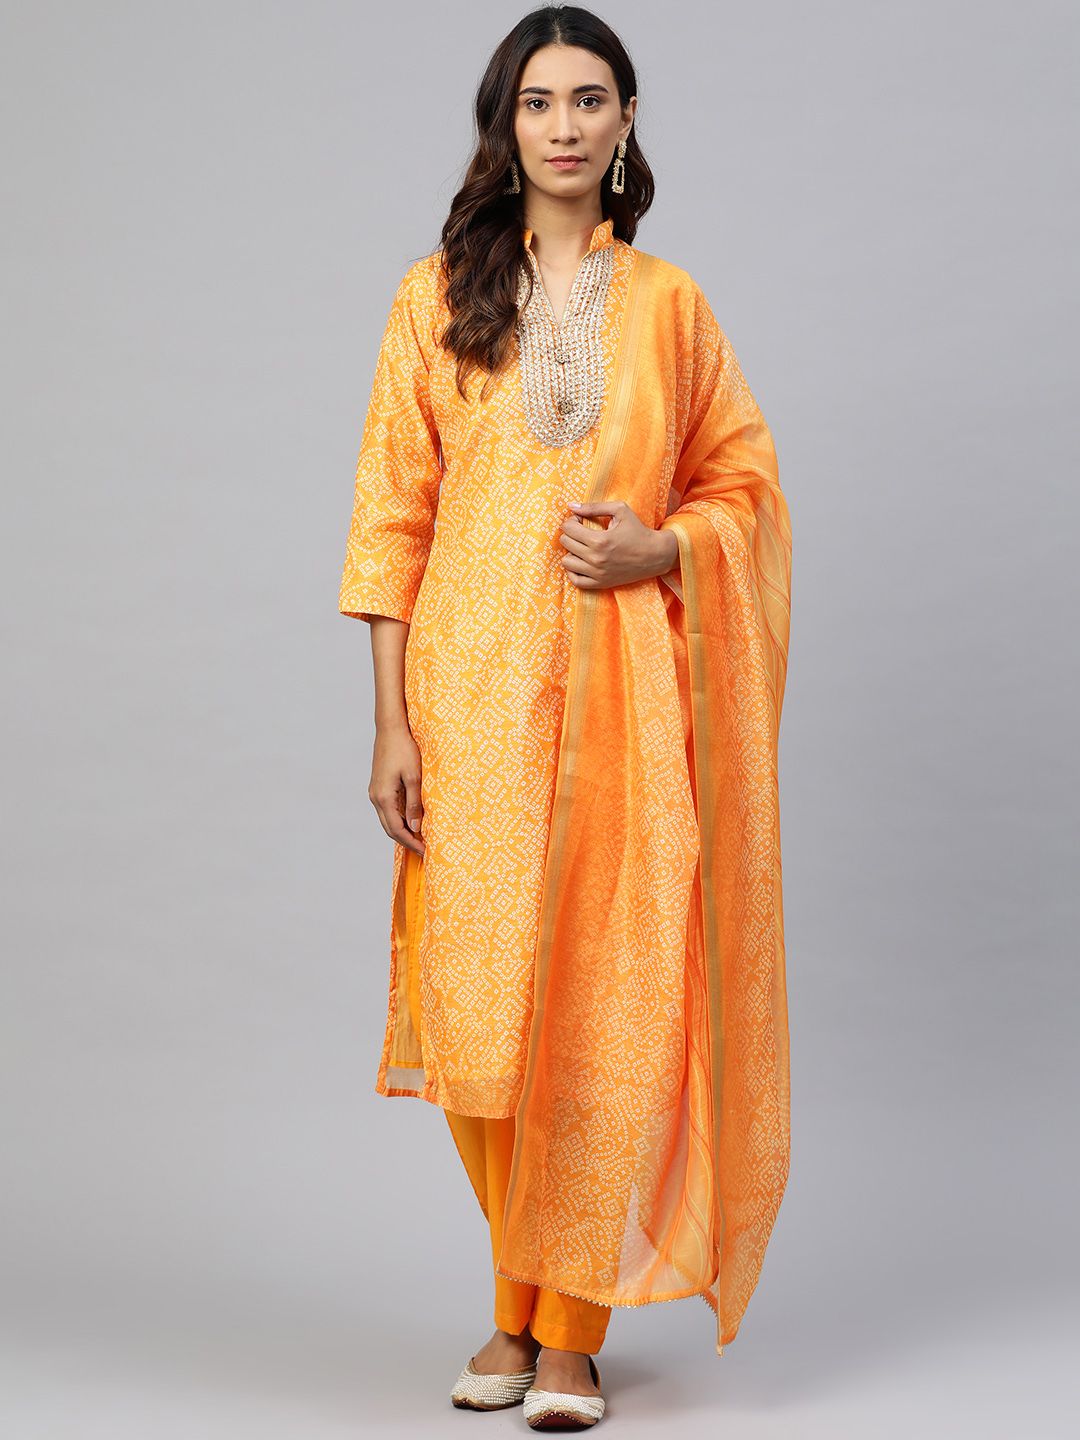 Readiprint Fashions Orange & White Bandhani Printed Unstitched Dress Material With Dupatta Price in India